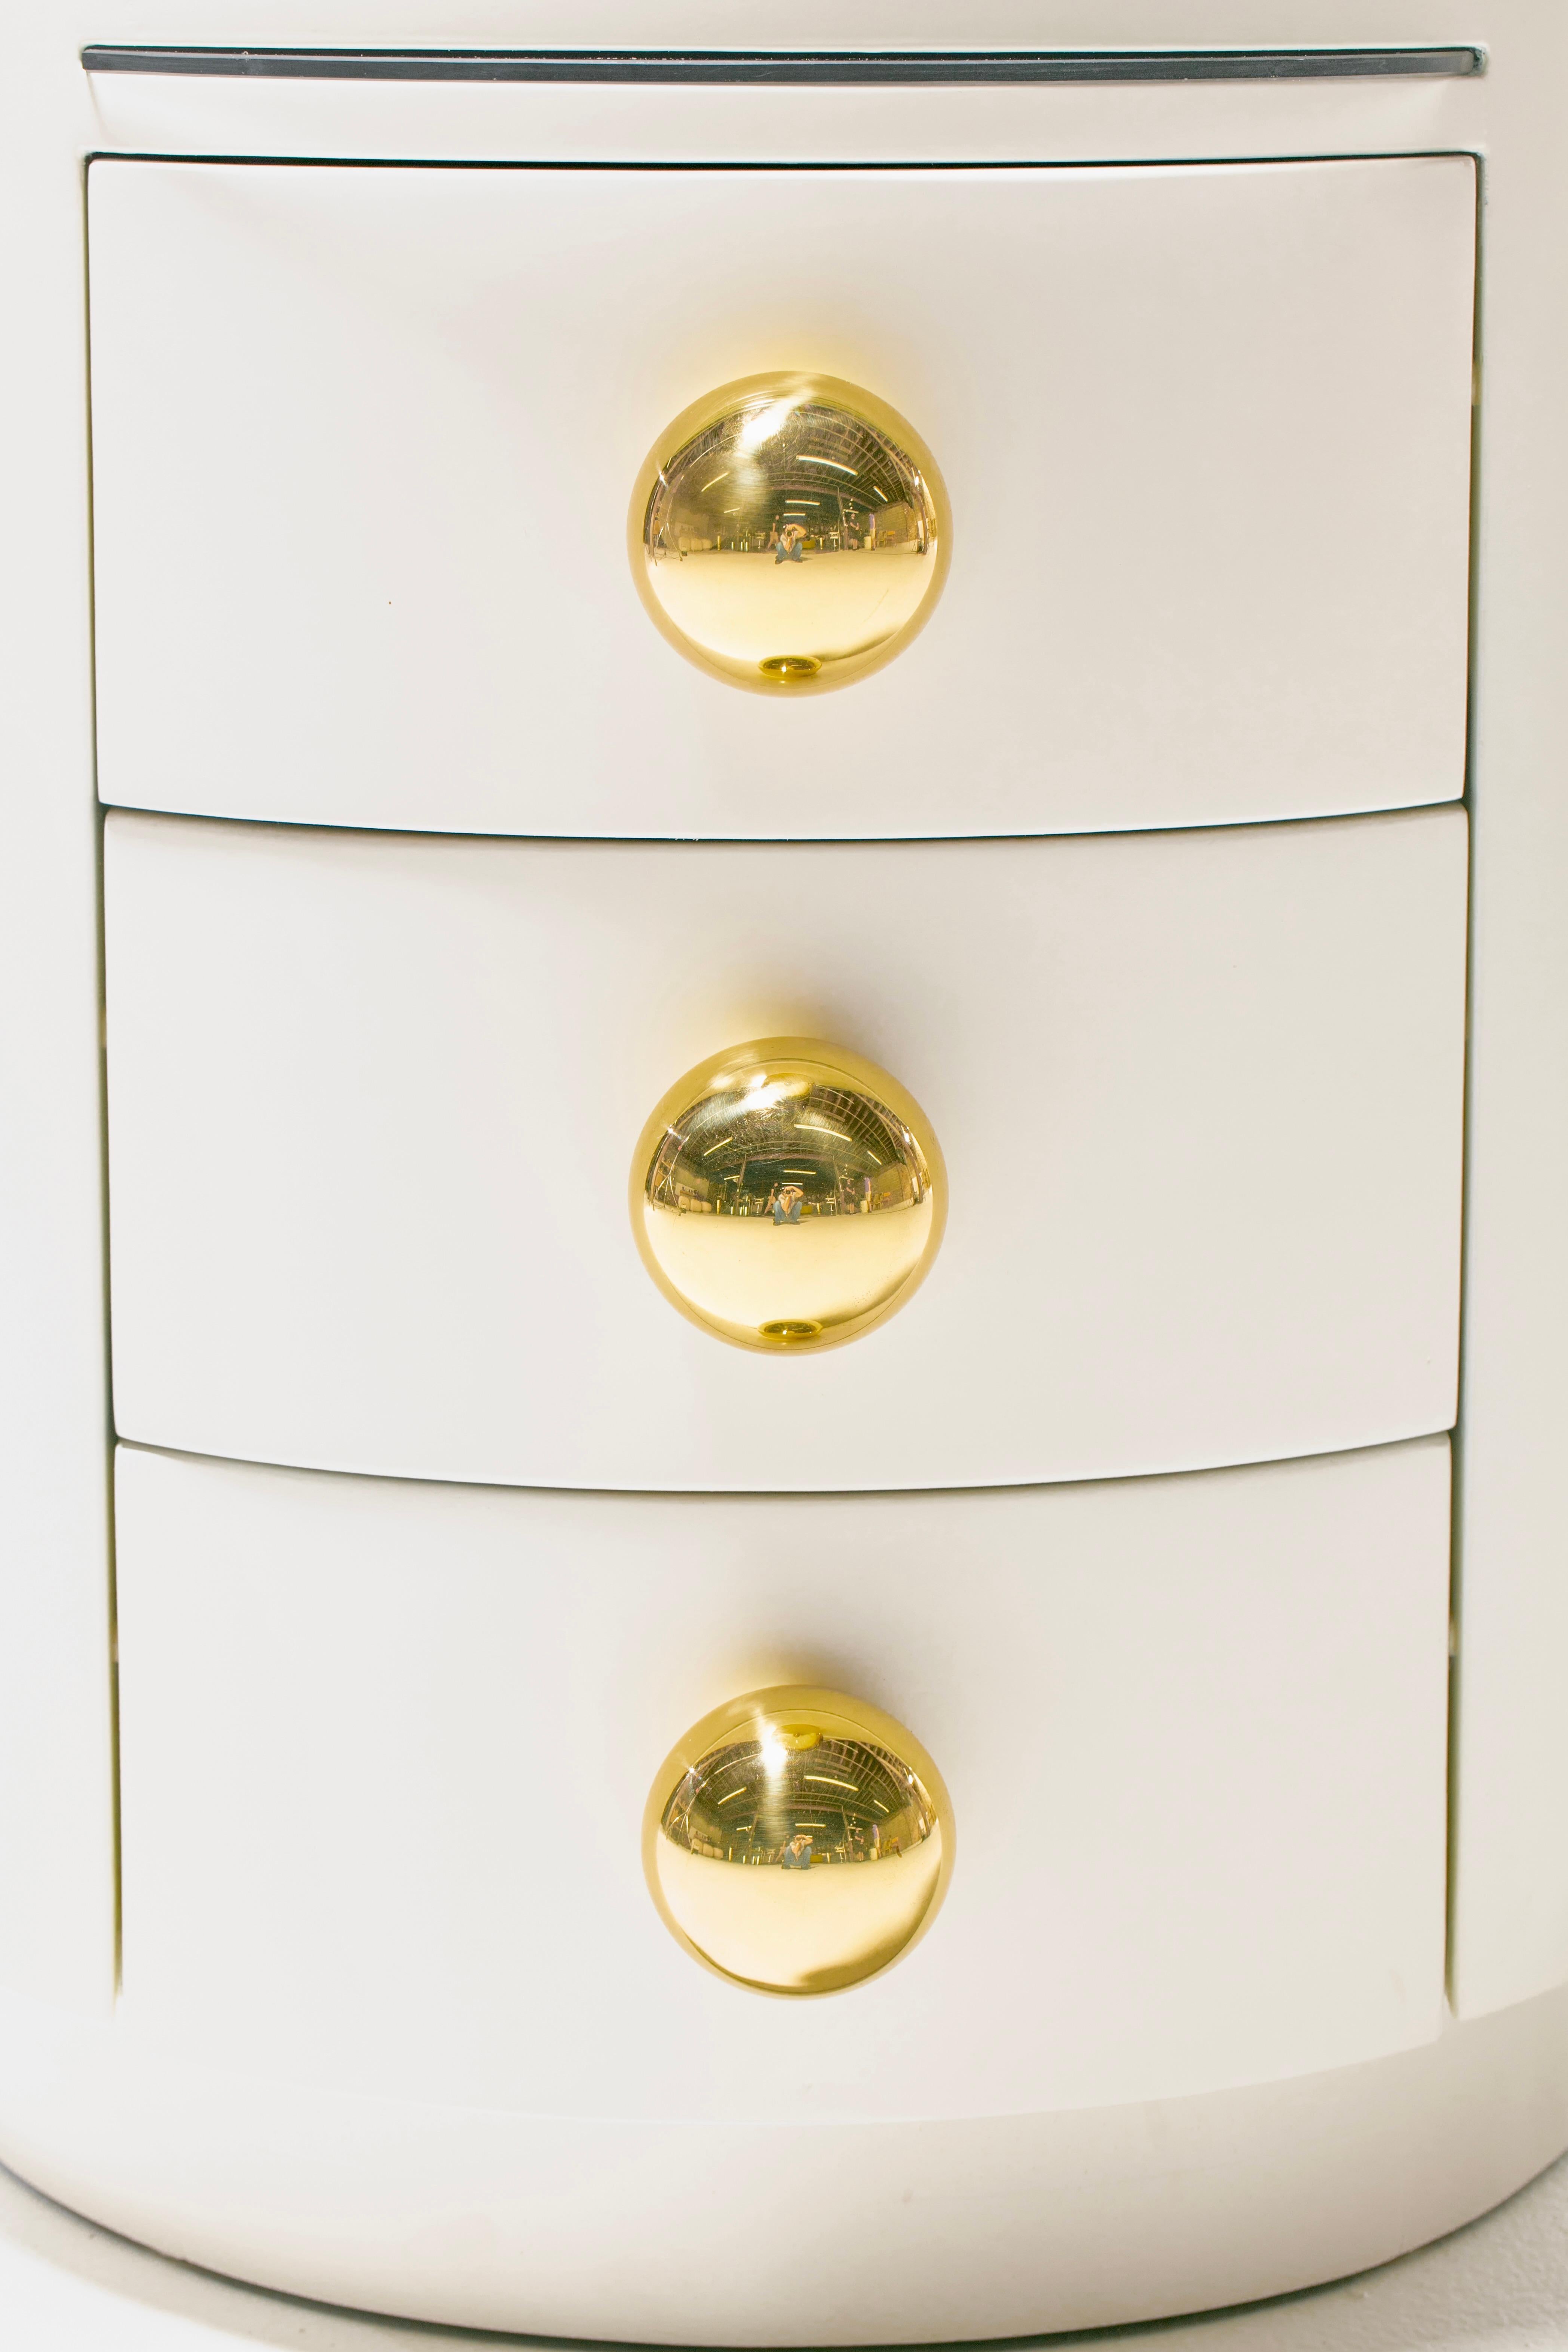 Post Modern Ivory Lacquered Night Stands with Dramatic Polished Brass Hardware In Good Condition For Sale In Saint Louis, MO